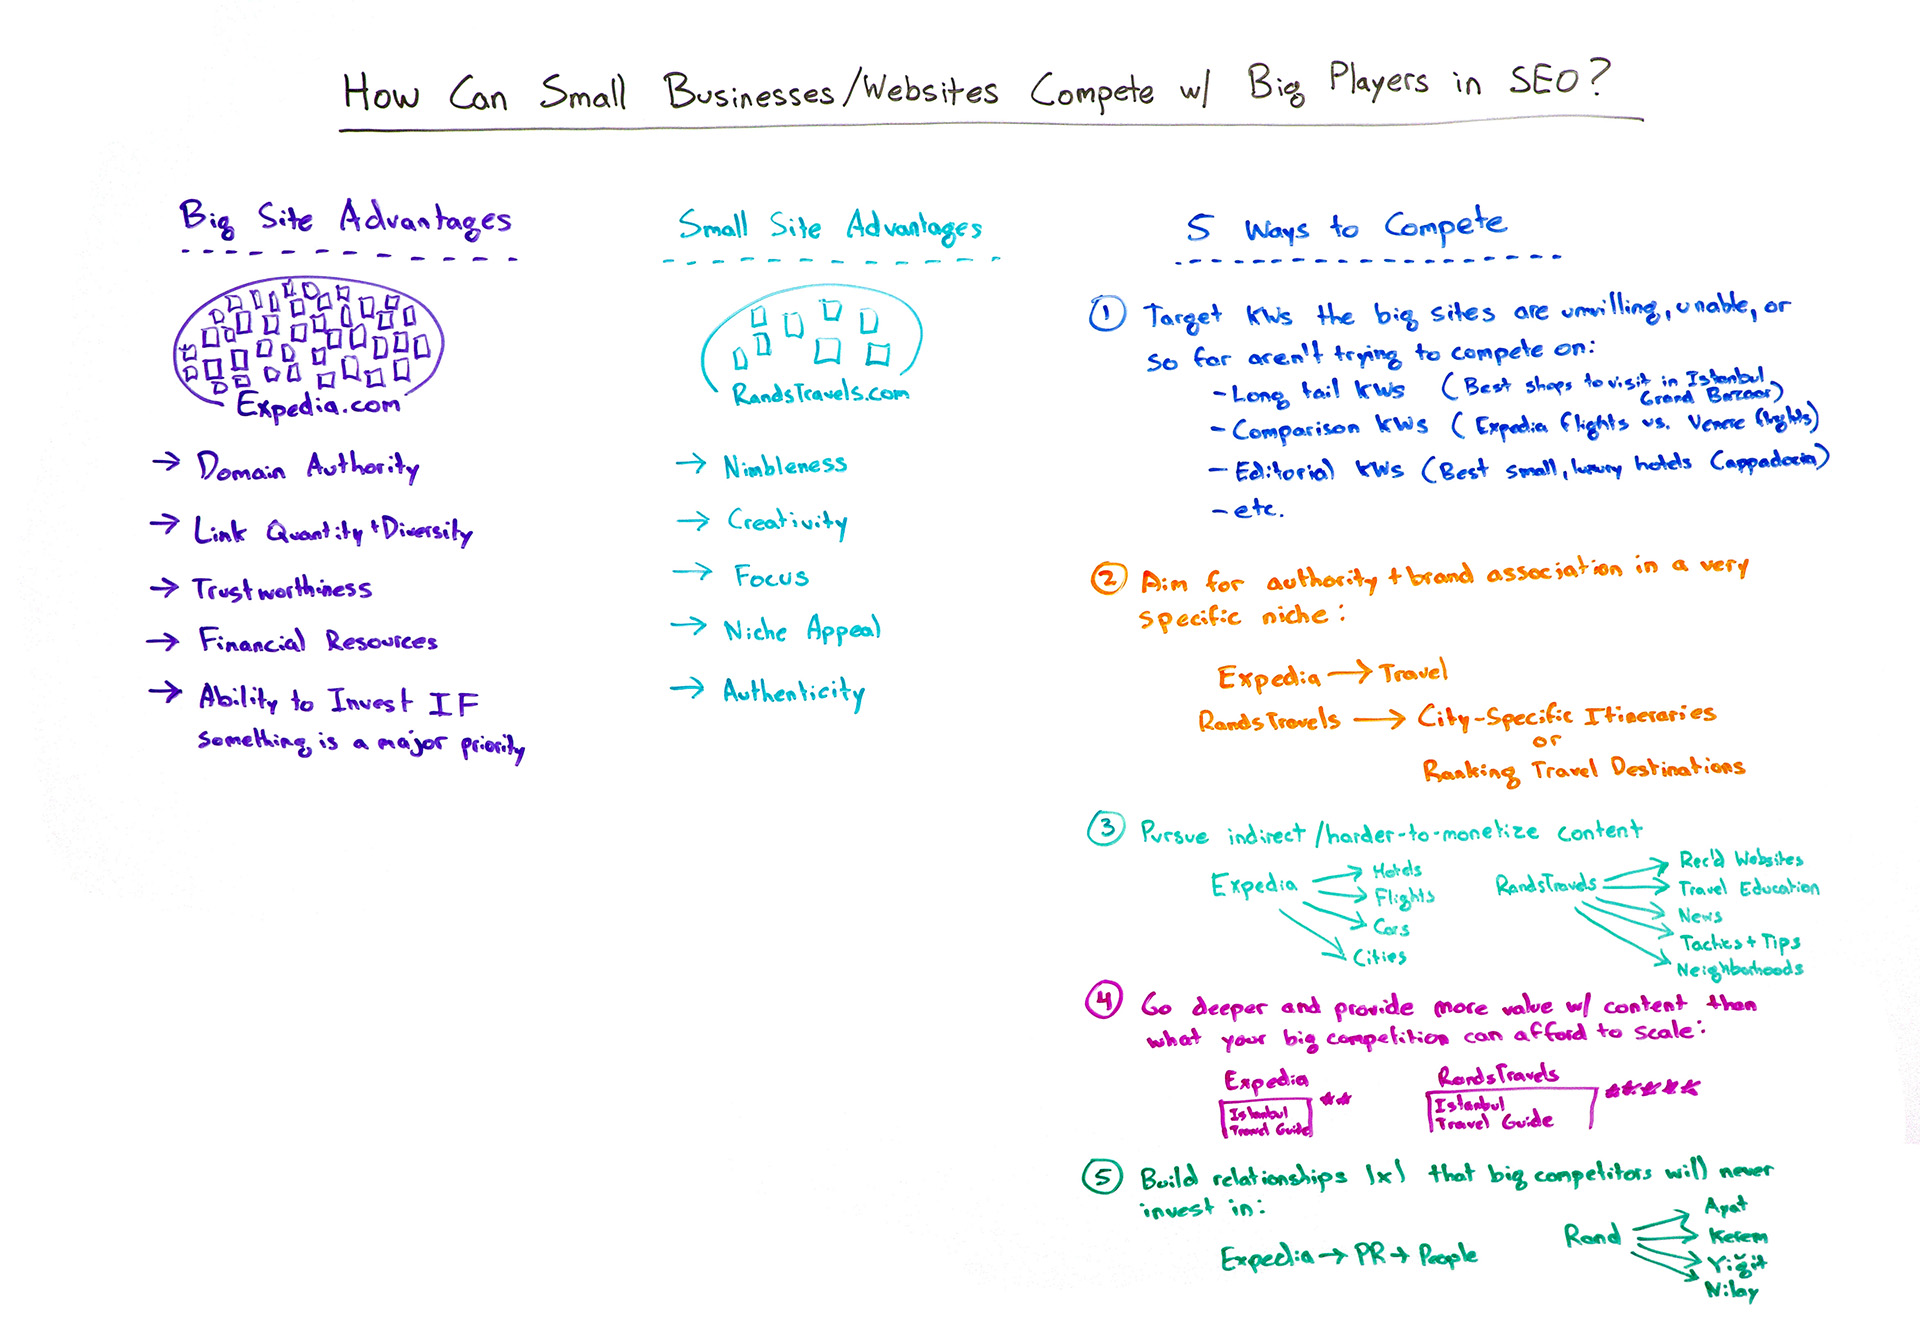 How Can Small Businesses/Websites Compete with Big Players in SEO?